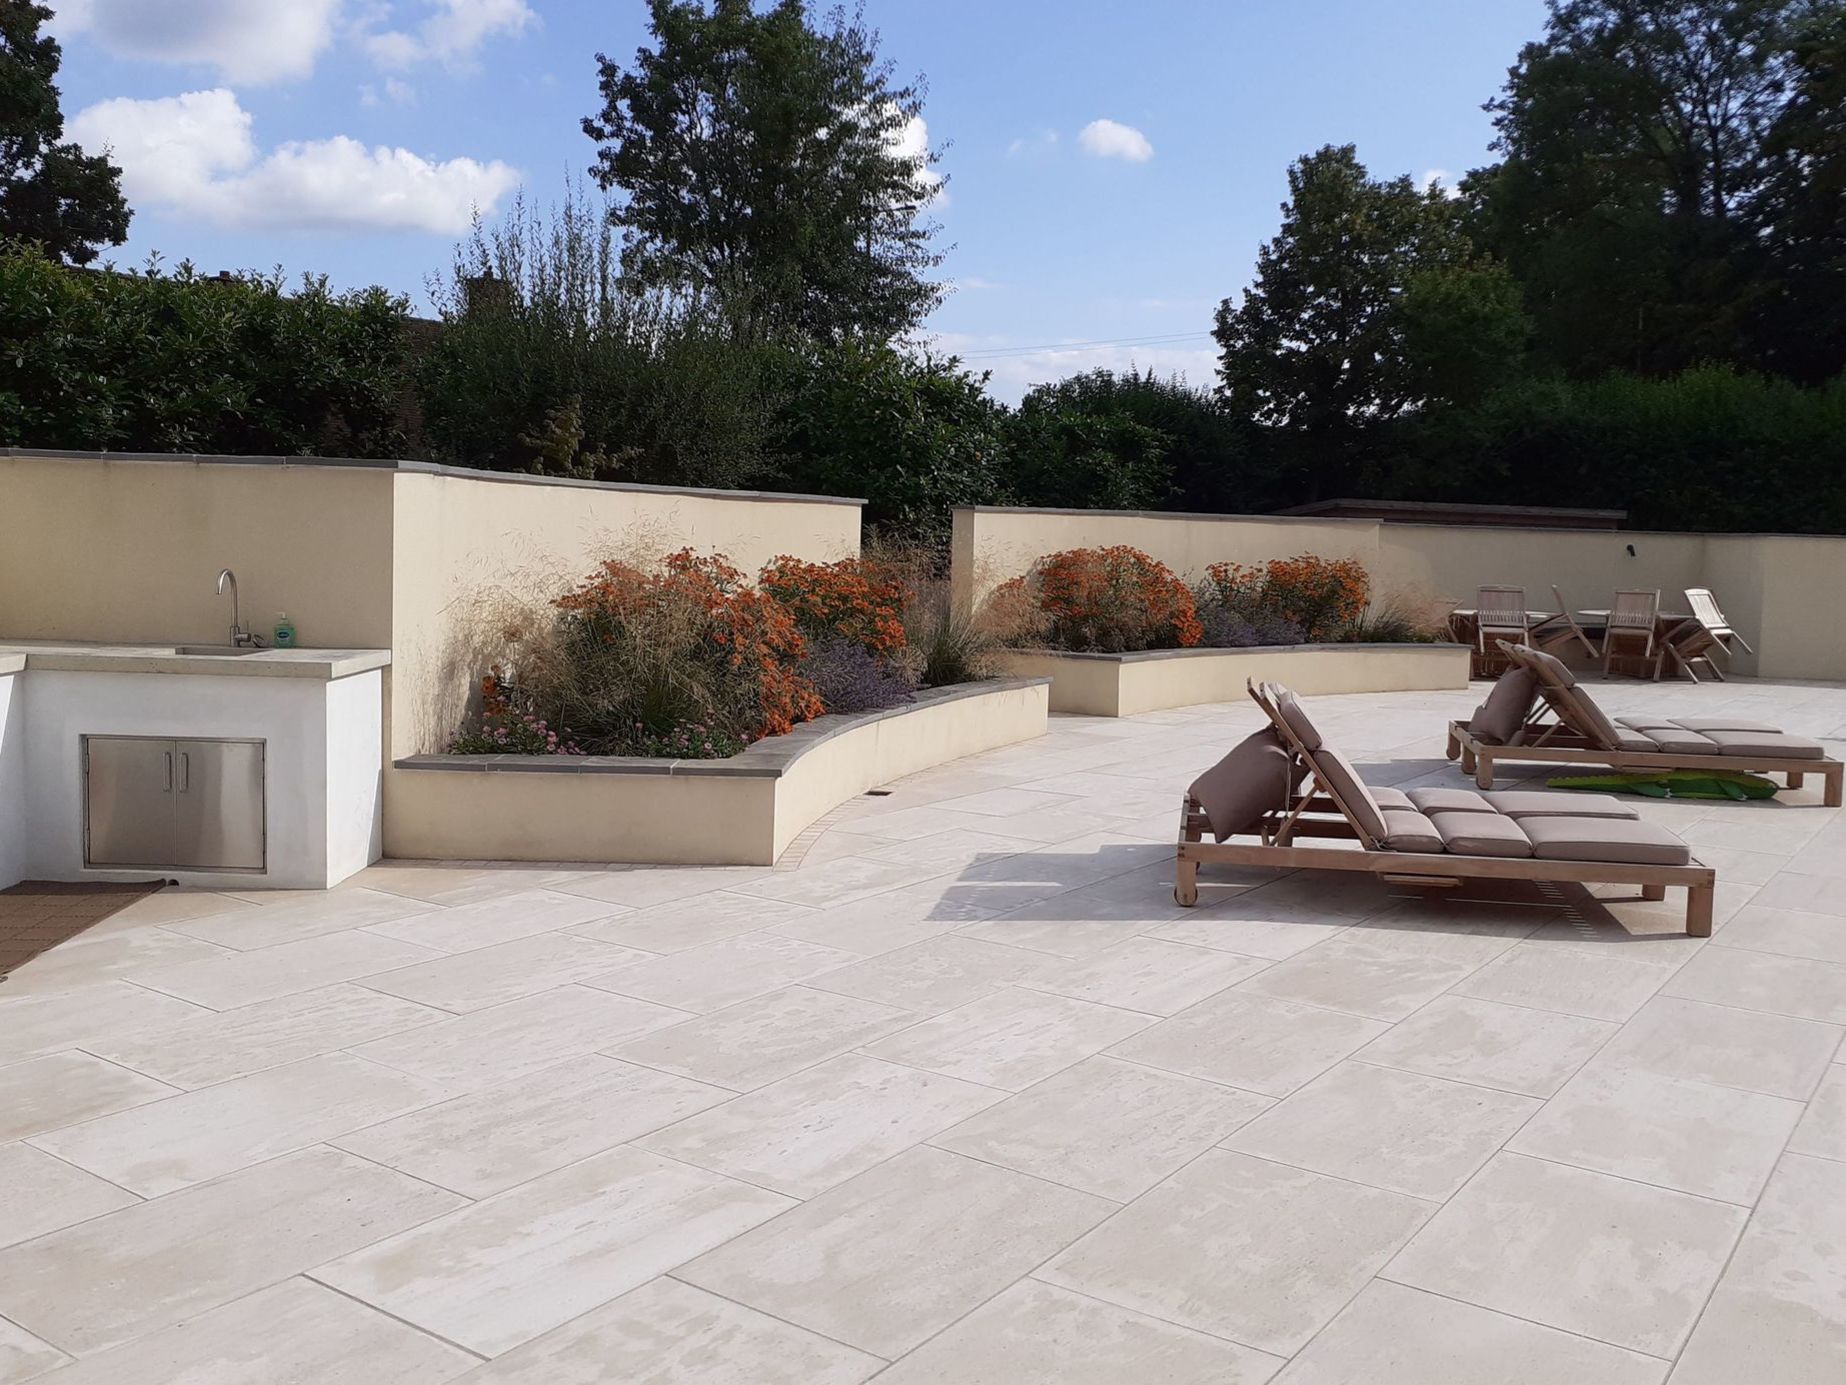 Garden design in Windsor Berkshire with swimming pool and outdoor kitchen